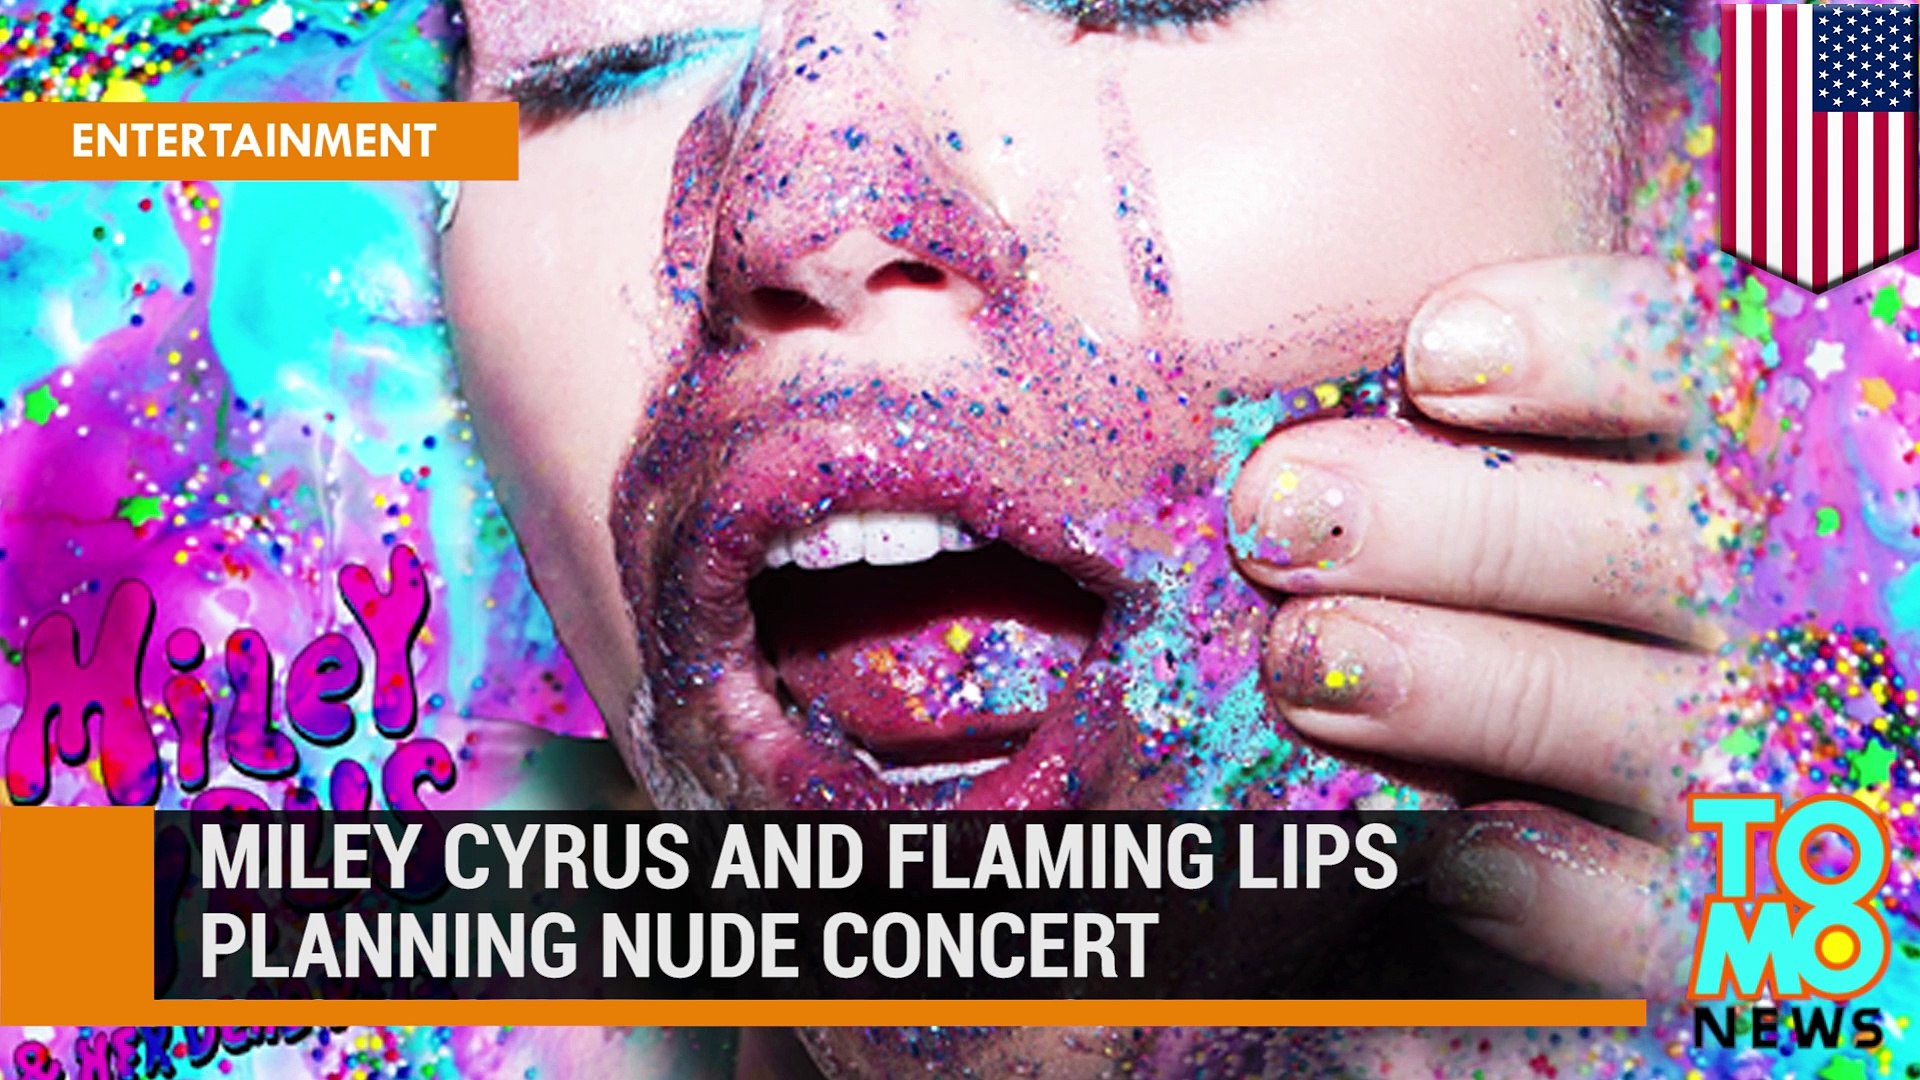 Miley Cyrus and The Flaming Lips planning all nude concert